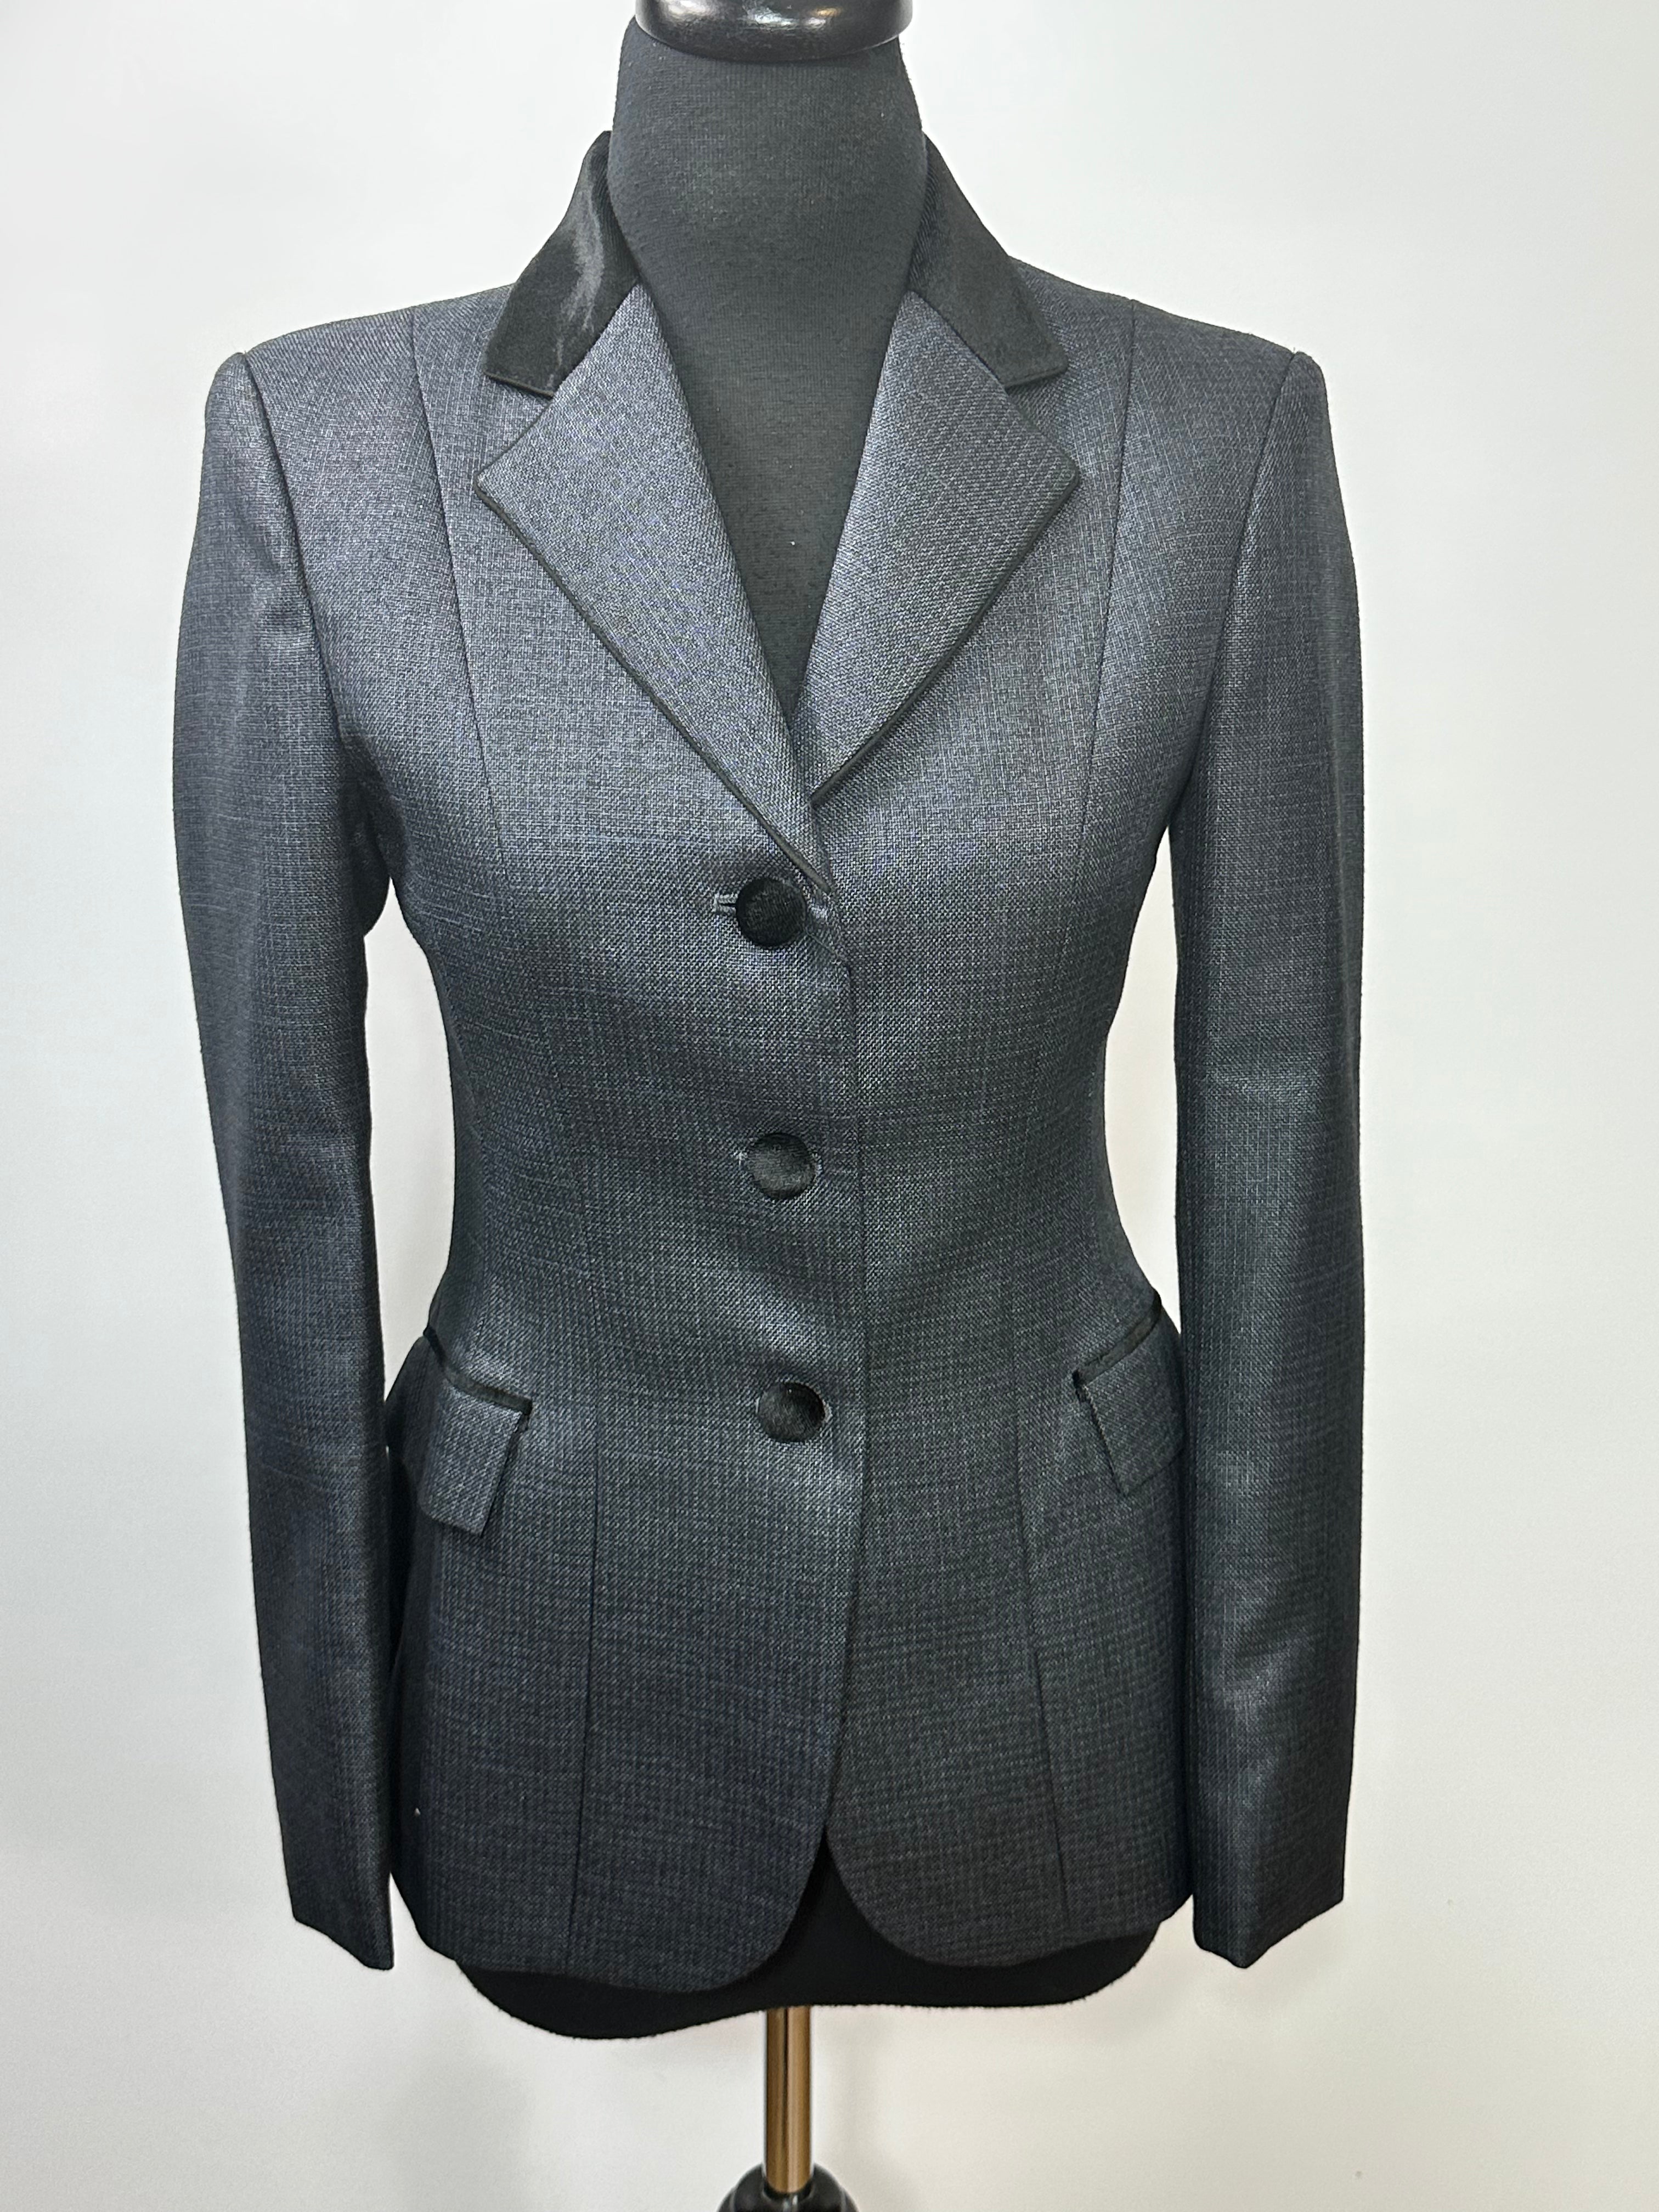 English Show Coat Dark Grey and Black with Sheen Fabric Code R313